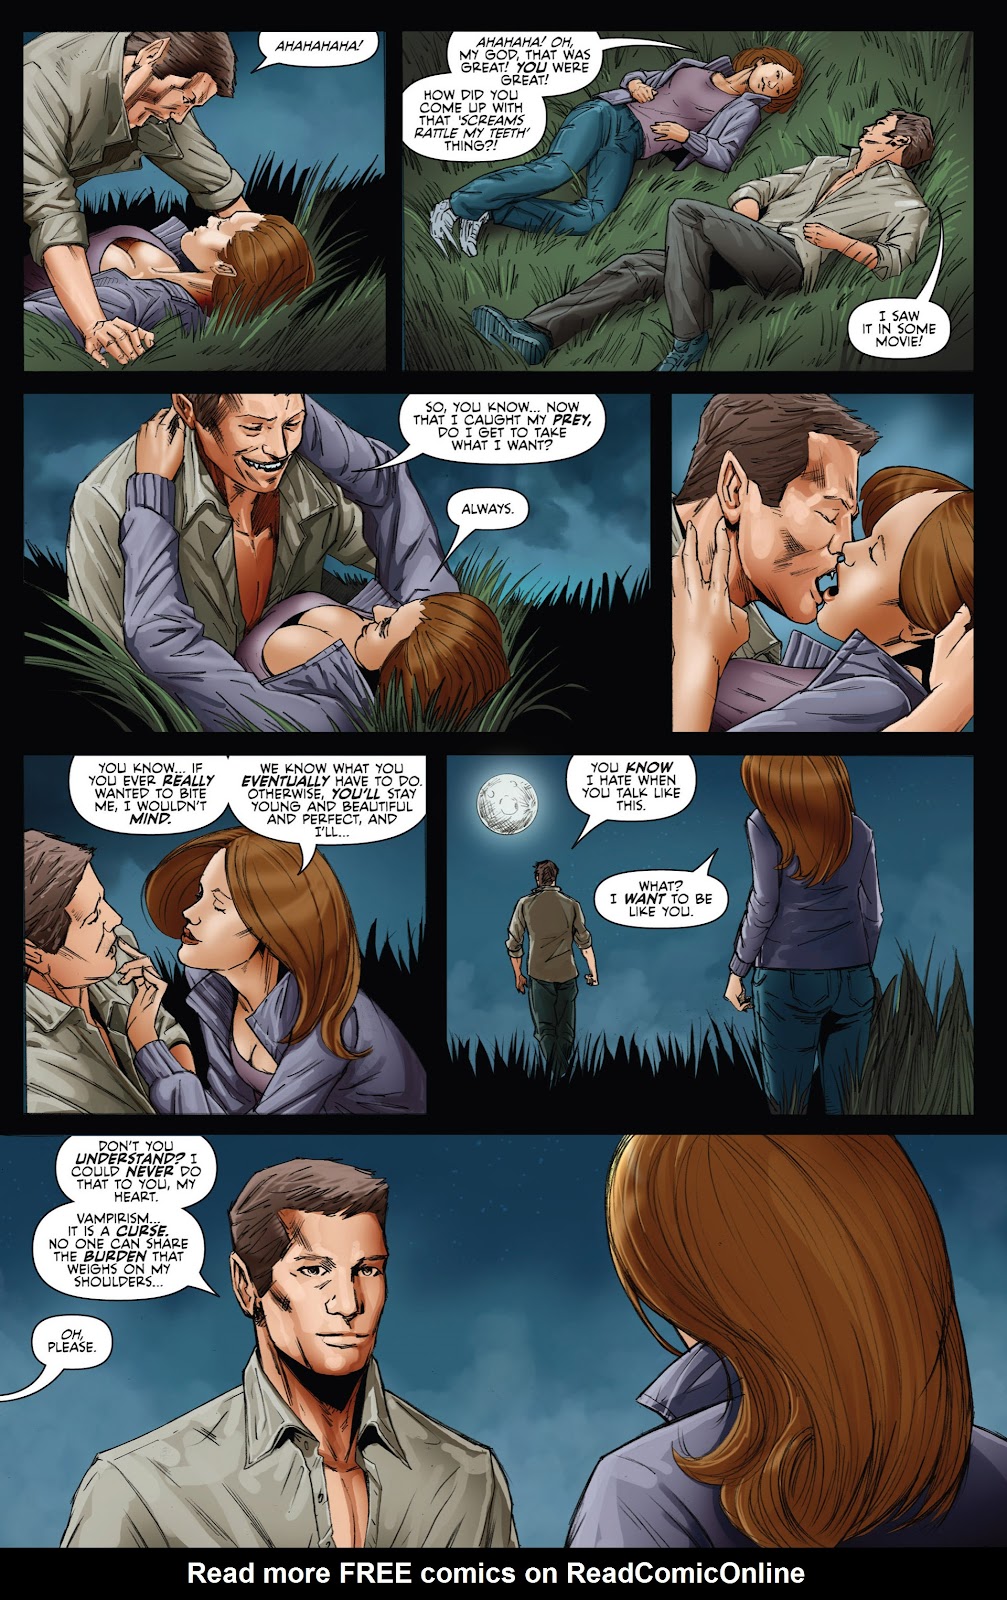 Grimm Fairy Tales presents Vampires: The Eternal issue 1 - Page 4